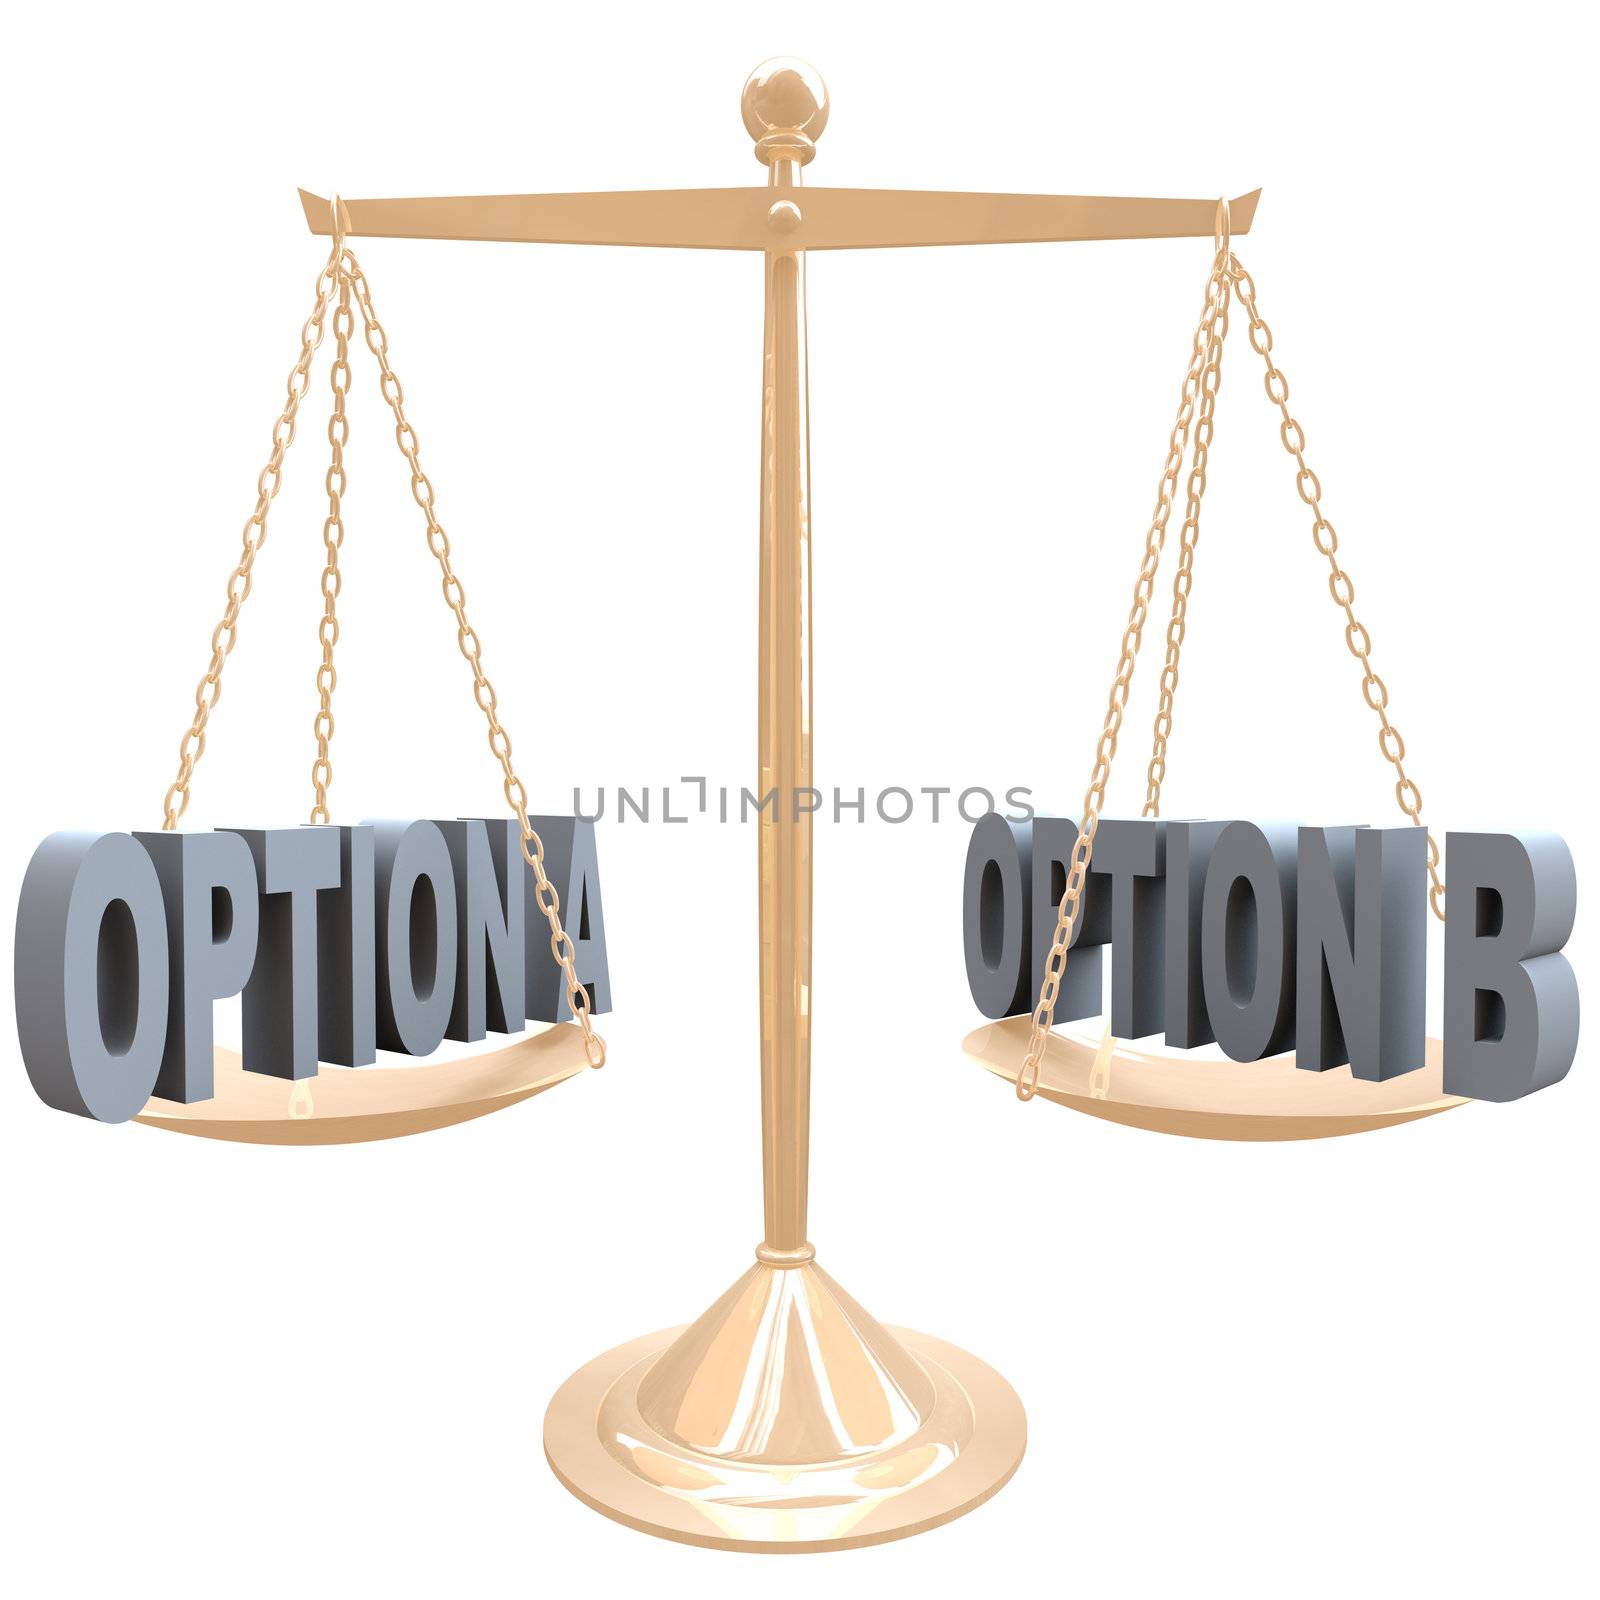 The words Option A and Option B on a gold metal scale, symbolizing the comparision of differences between two choices or selections